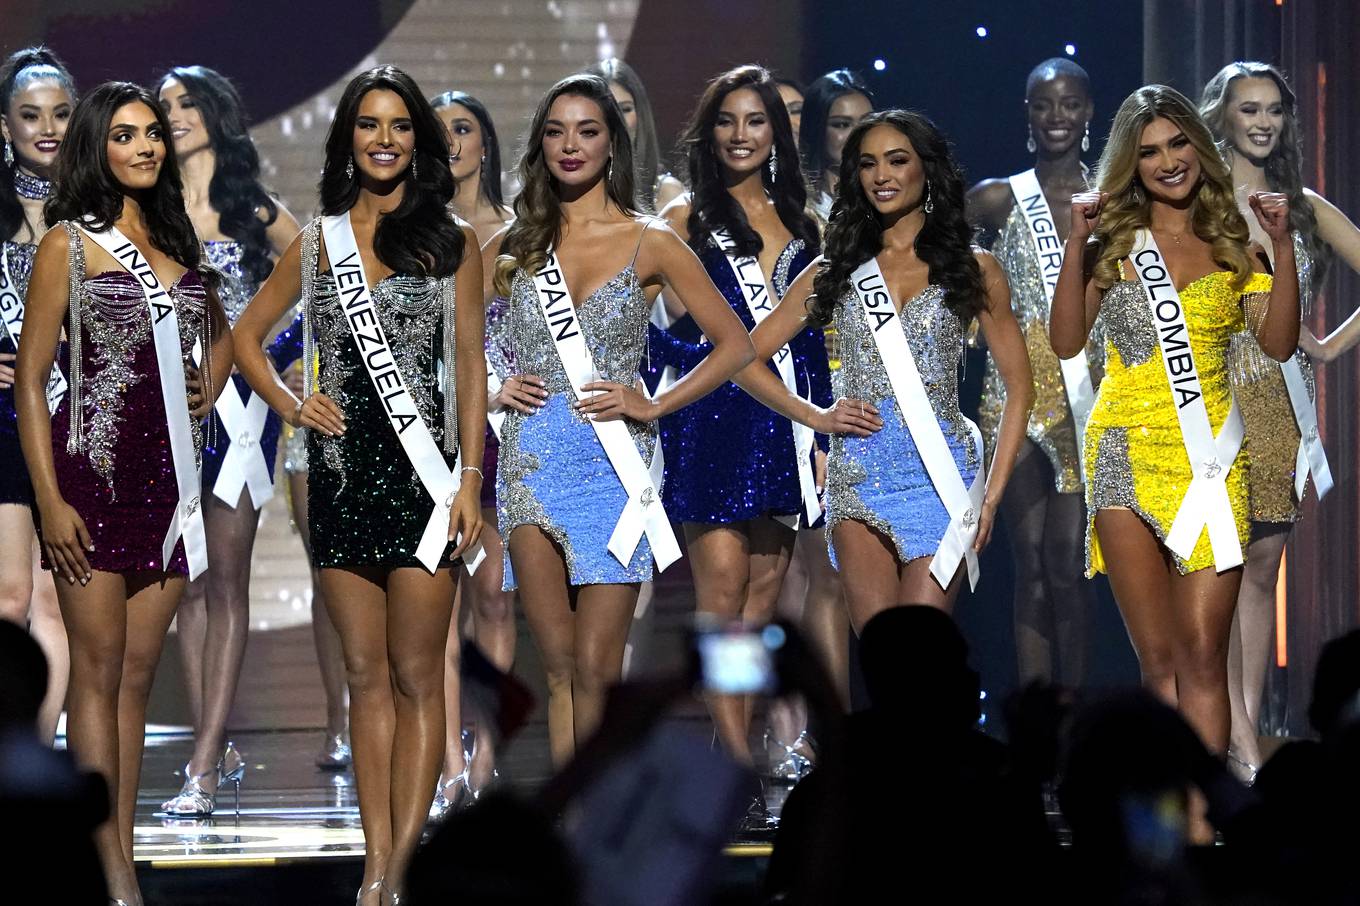 Semi-Finalists (From L) Miss India Divita Rai, Miss Venezuela Amanda Dudamel, Miss Spain Alicia Faubel, Miss USA R'Bonney Gabriel and Miss Colombia Maria Fernanda Aristizabal  take part of the 71st Miss Universe competition at the New Orleans Ernest N. Morial Convention Center in New Orleans, Louisiana on January 14, 2023. (Photo by TIMOTHY A. CLARY / AFP)